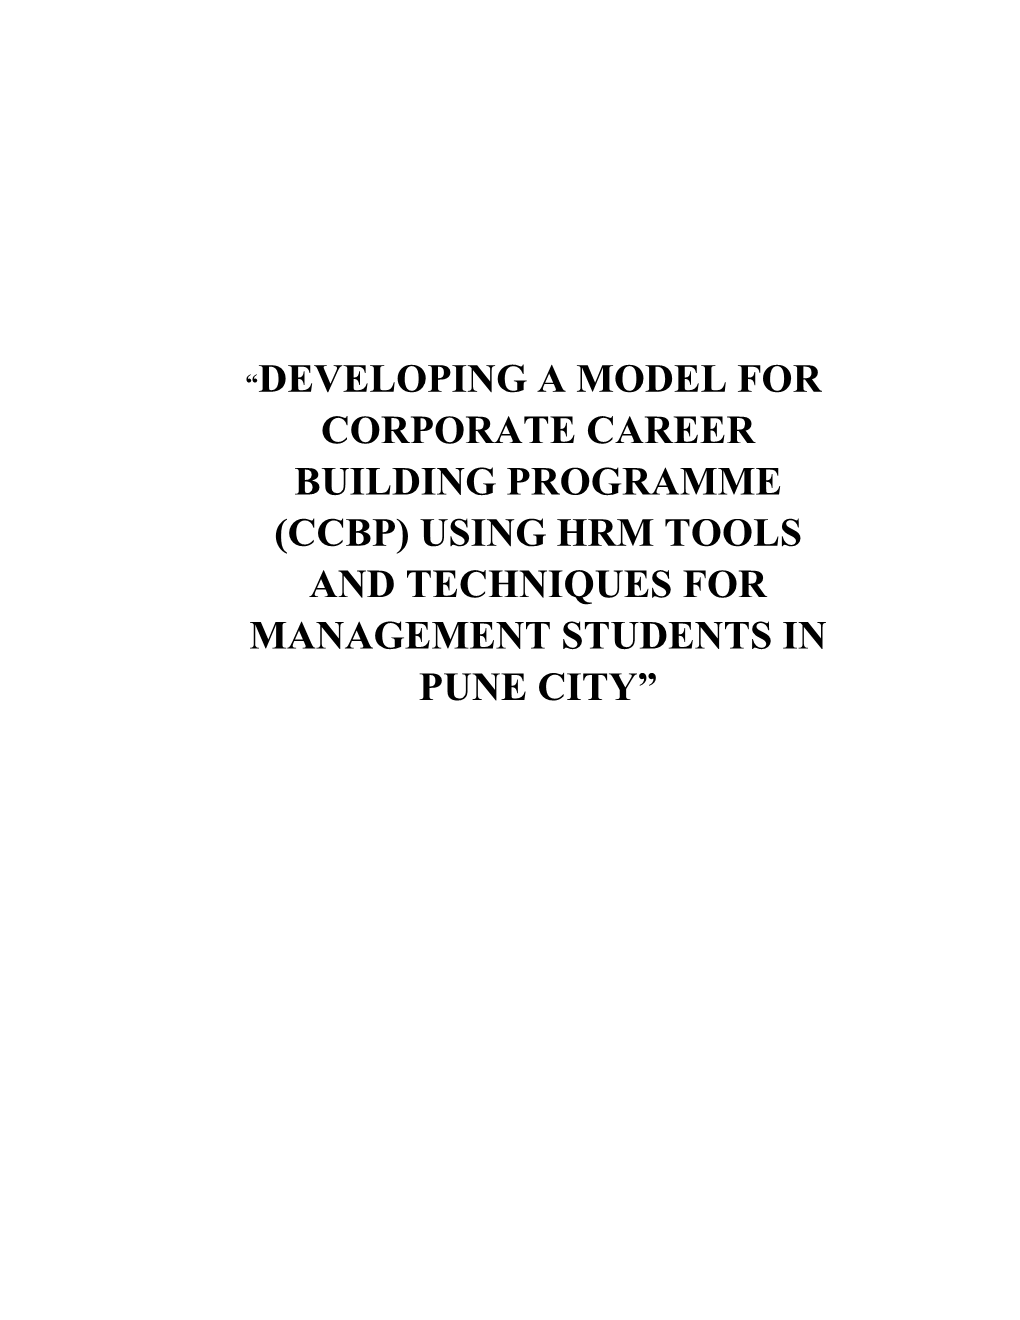 Developing a Model for Corporate Career Building Programme (Ccbp) Using Hrm Tools and Techniques for Management Students in Pune City”